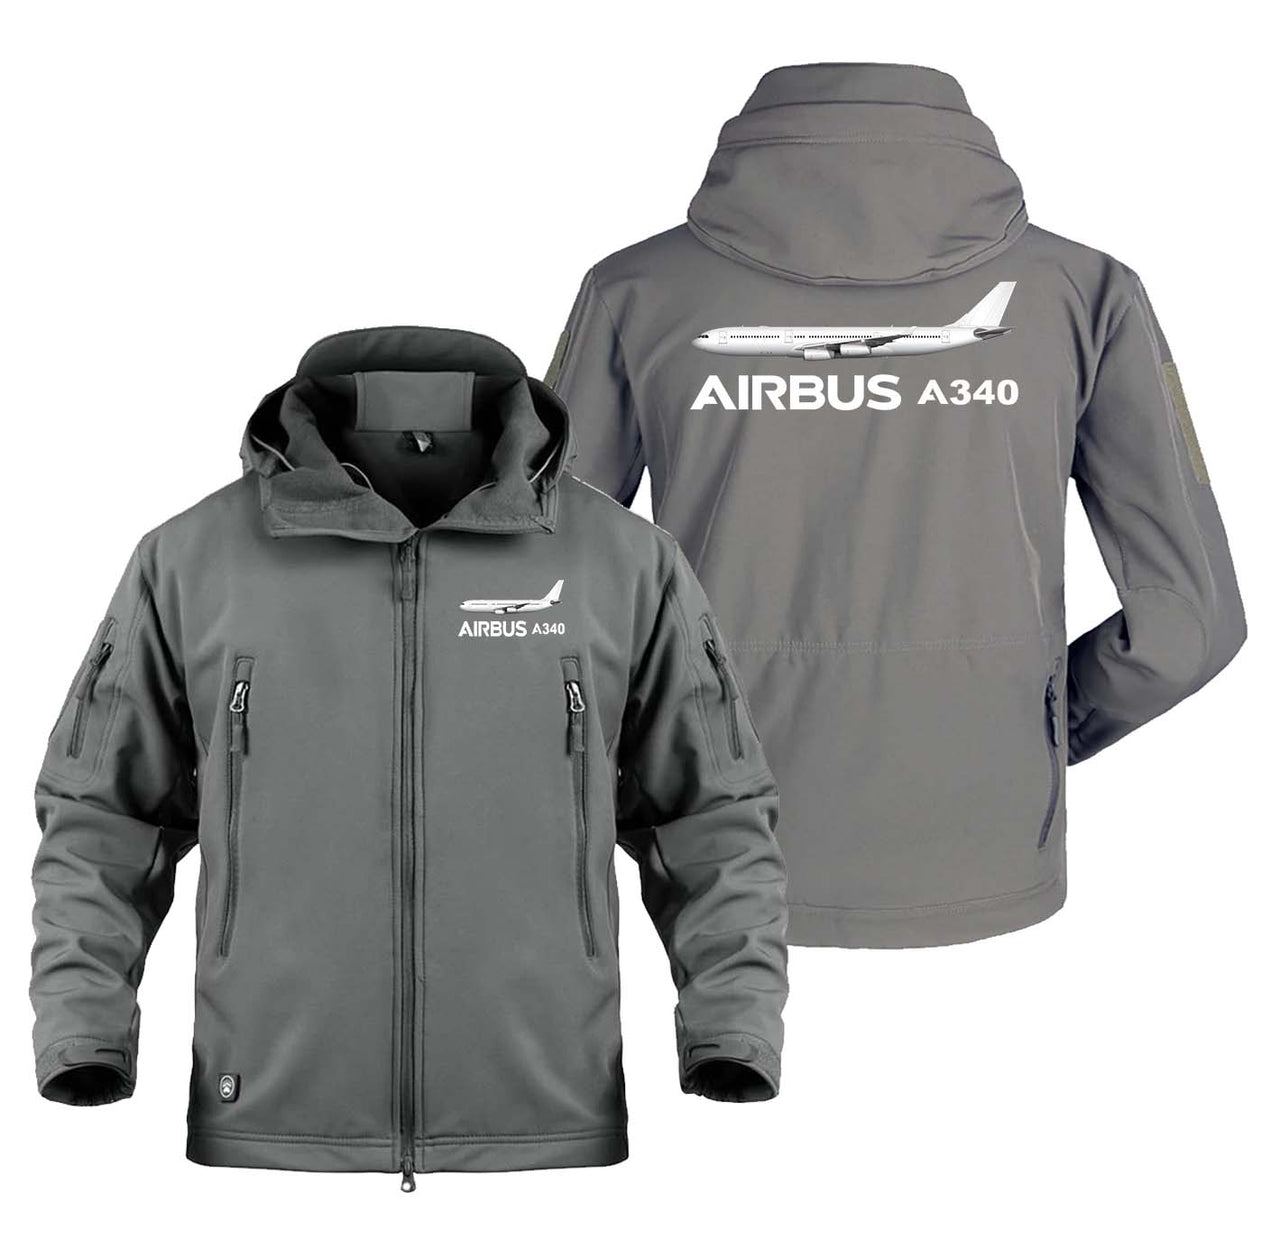 The Airbus A340 Designed Military Jackets (Customizable)